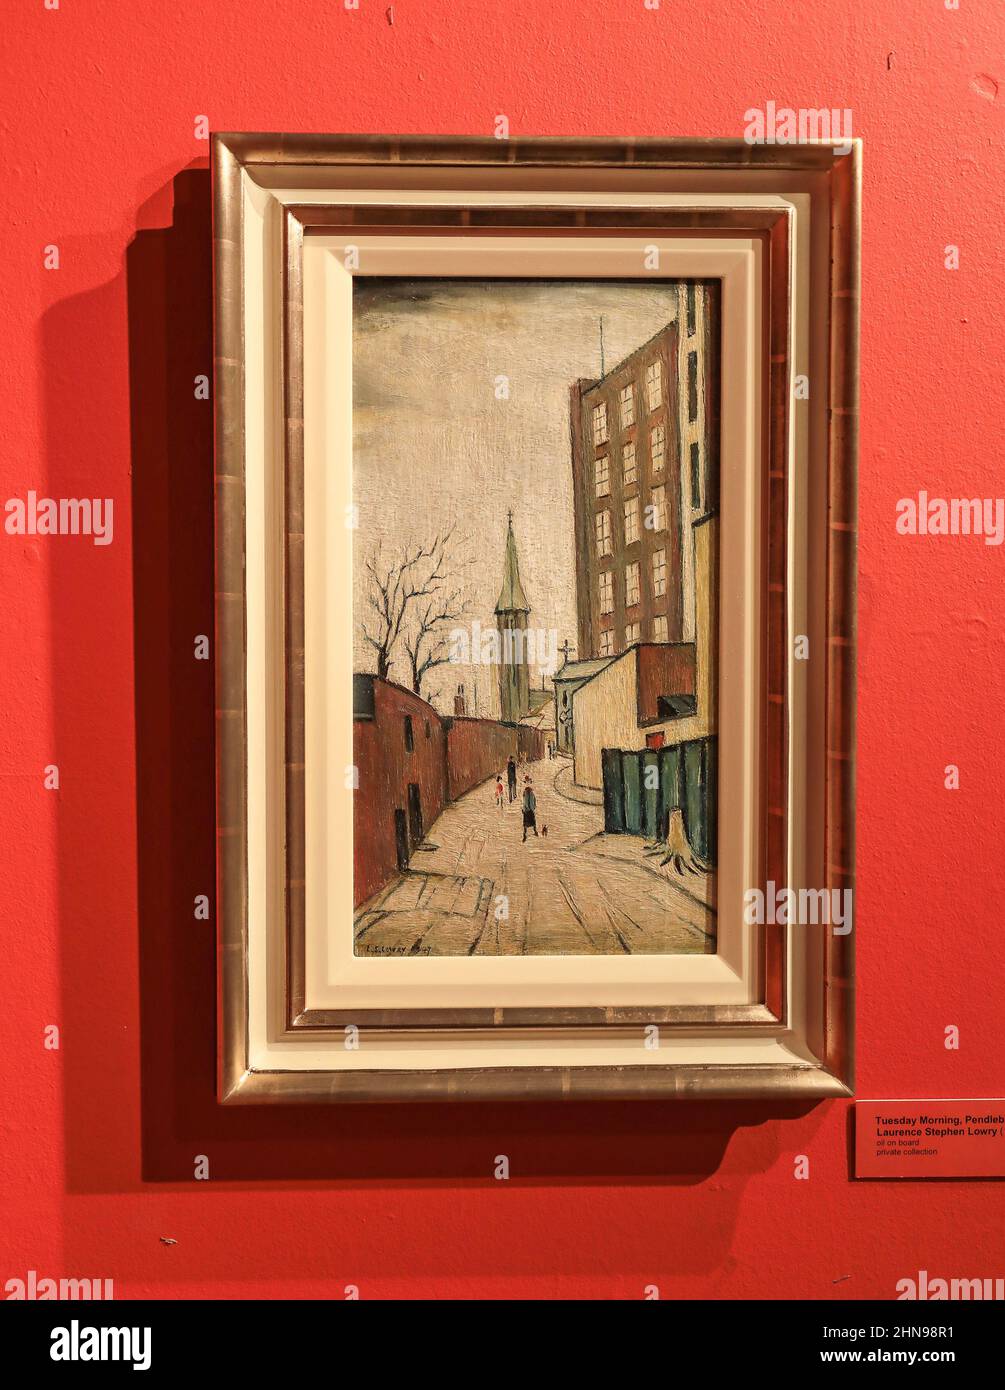 A picture called 'Tuesday Morning, Pendlebury' by L. S. Lowry at the Potteries Museum and Art Gallery, Hanley, Stoke-on-Trent, Staffs, England, UK Stock Photo